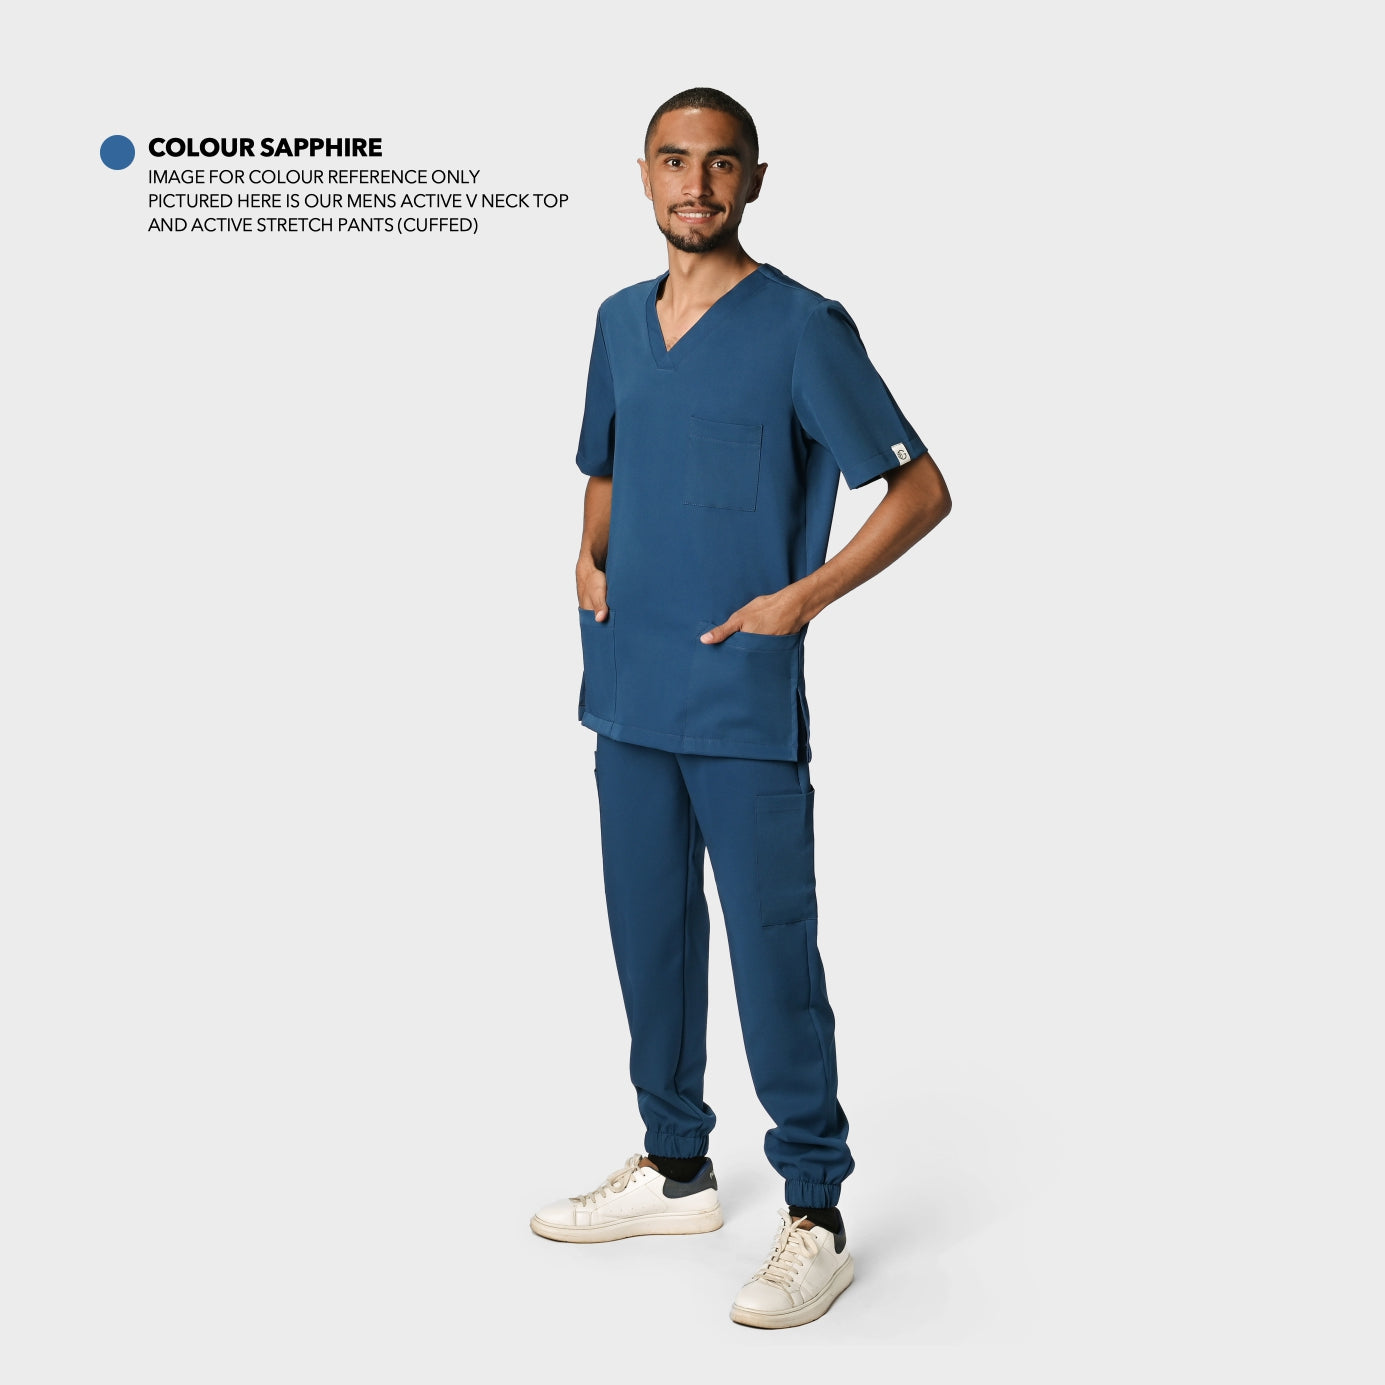 MENS LUXE LAB COAT - Greens Medi Scrubs South Africa - Premium Medical Uniforms & Apparel - Delivery Across SA 